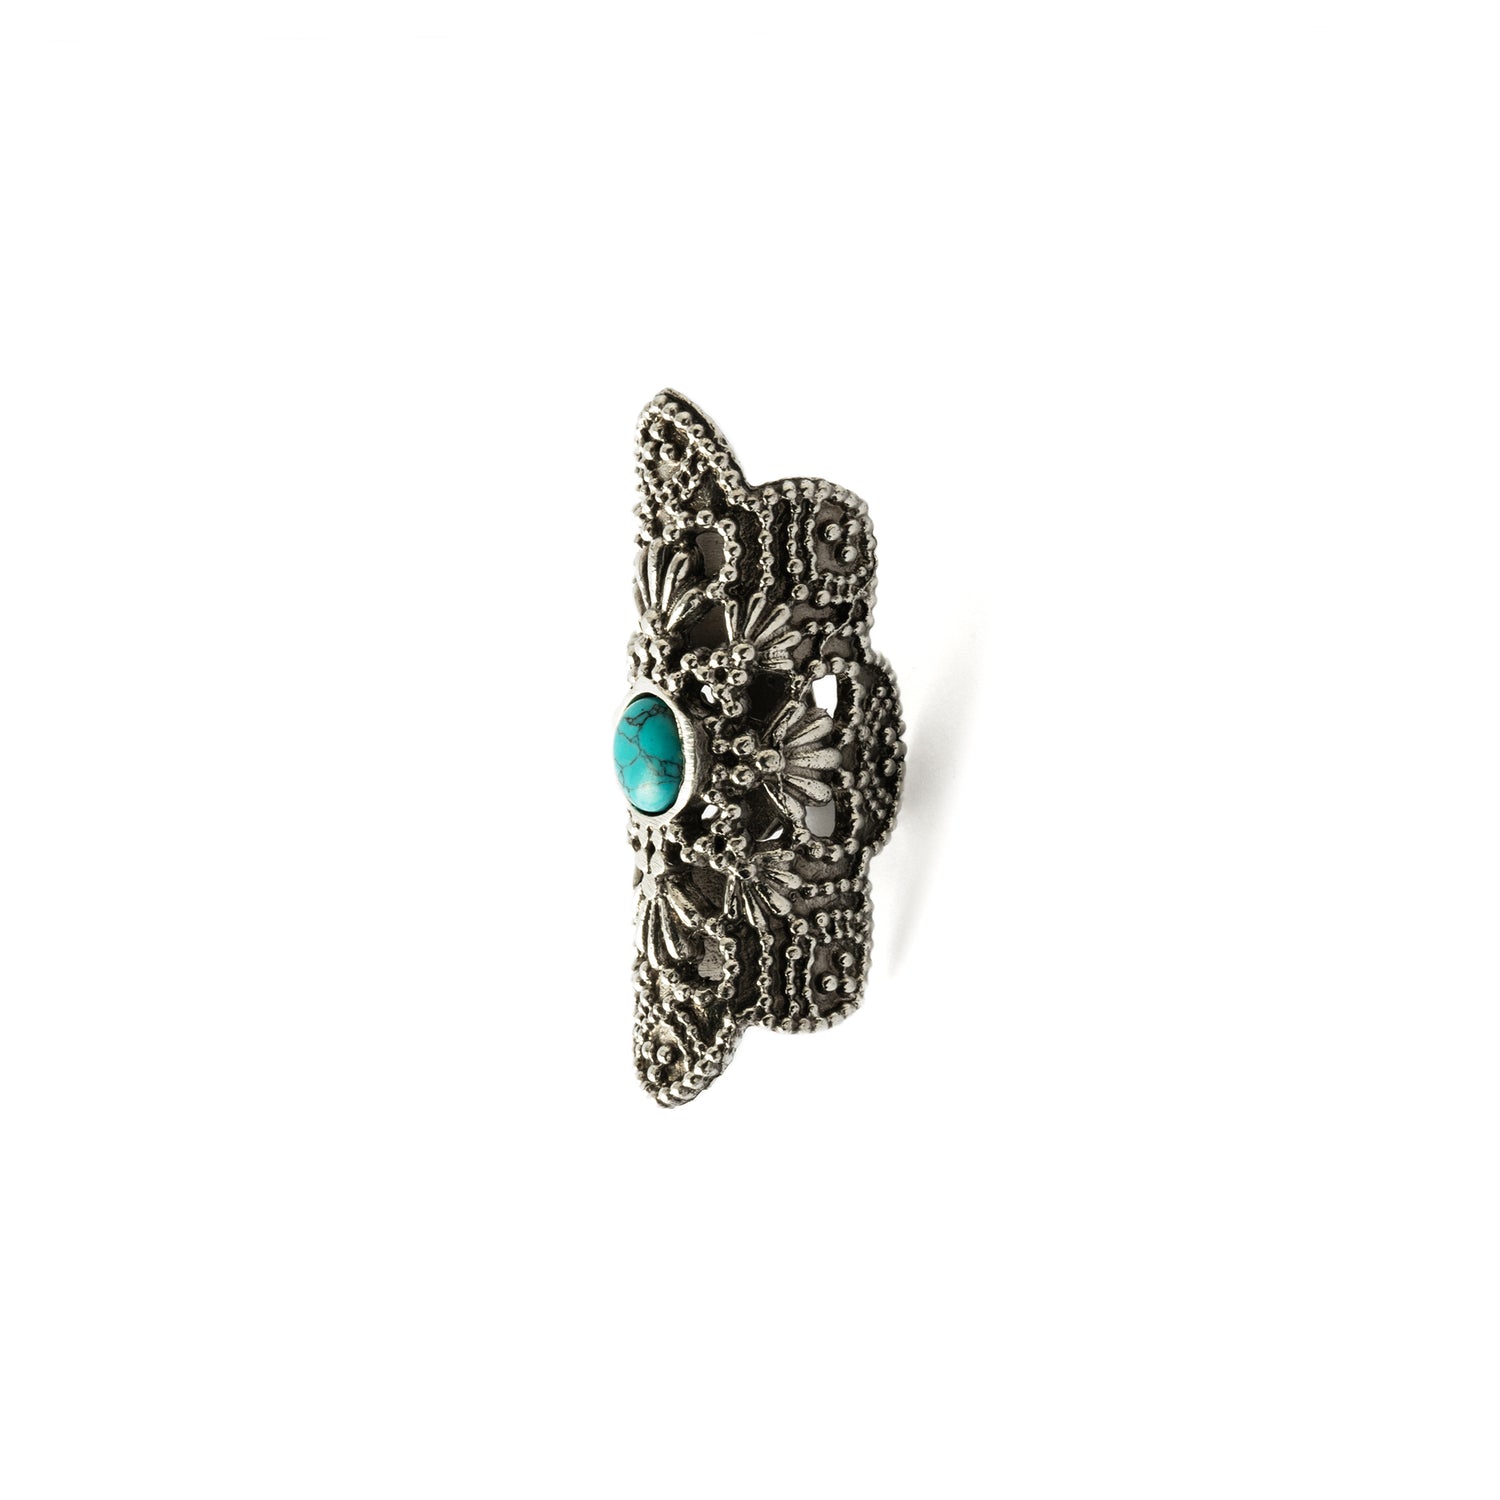 Turquoise Ranis Ear Cuff side view